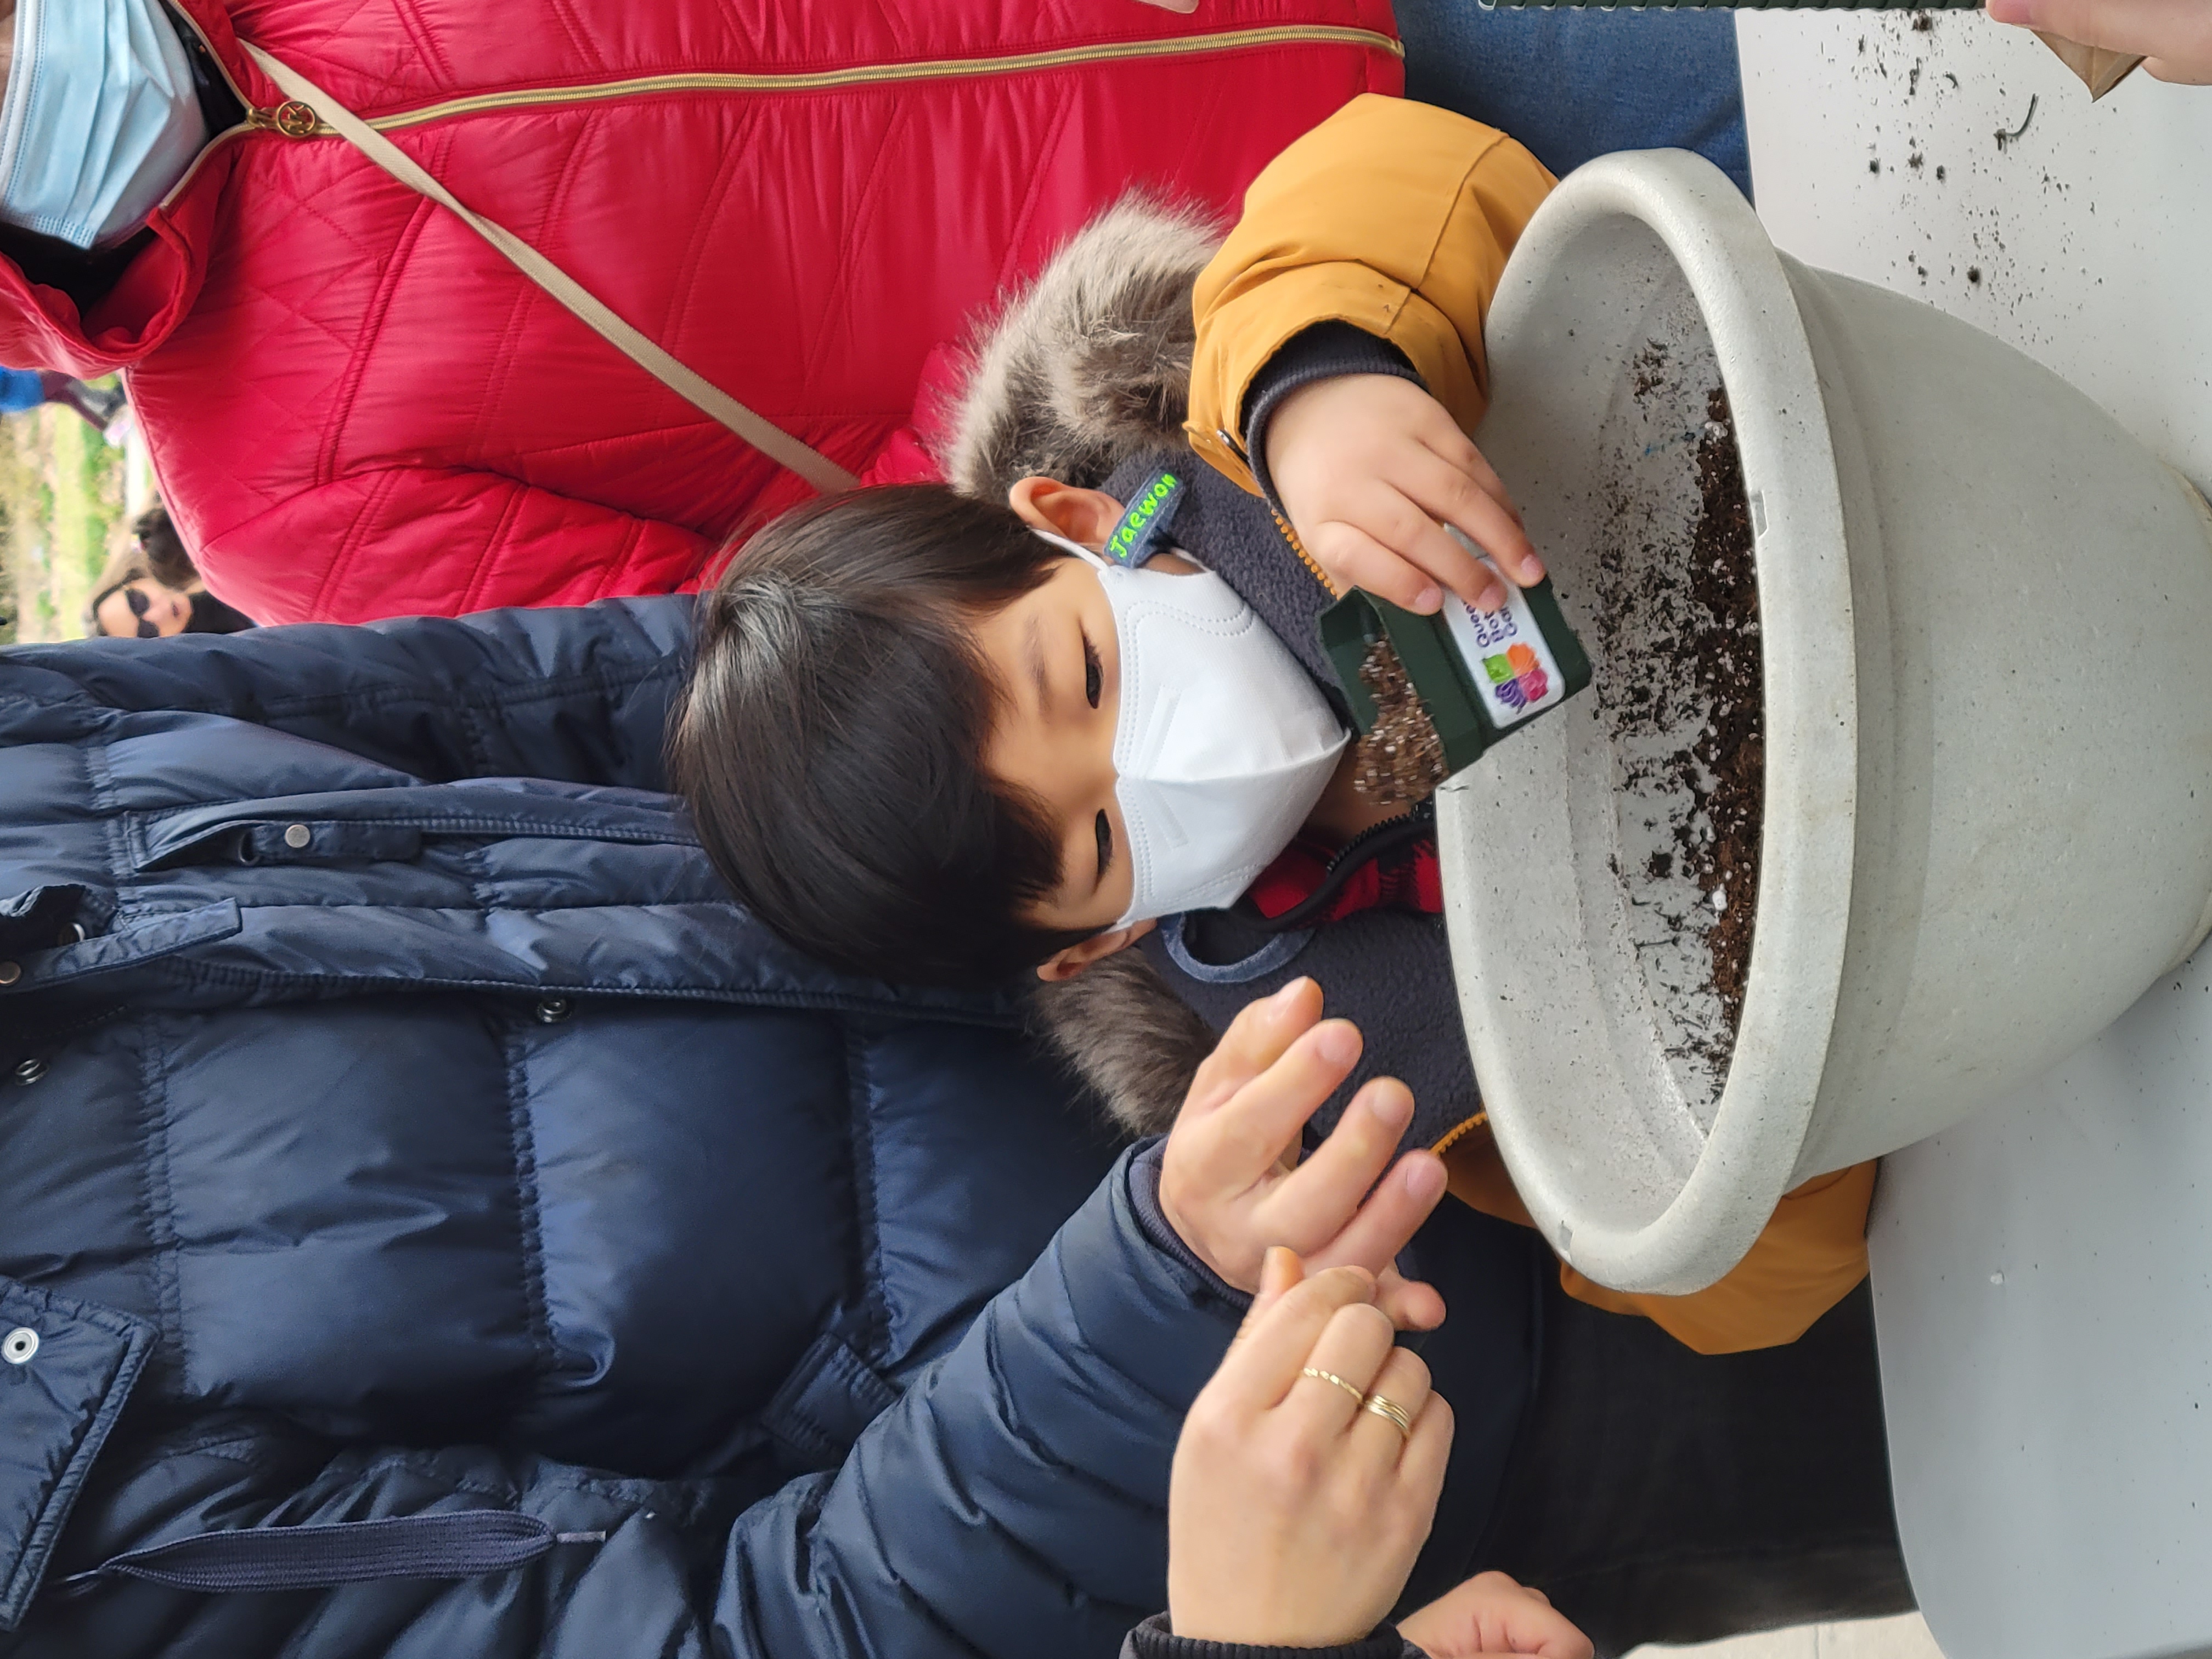 Child planting seeds in pot